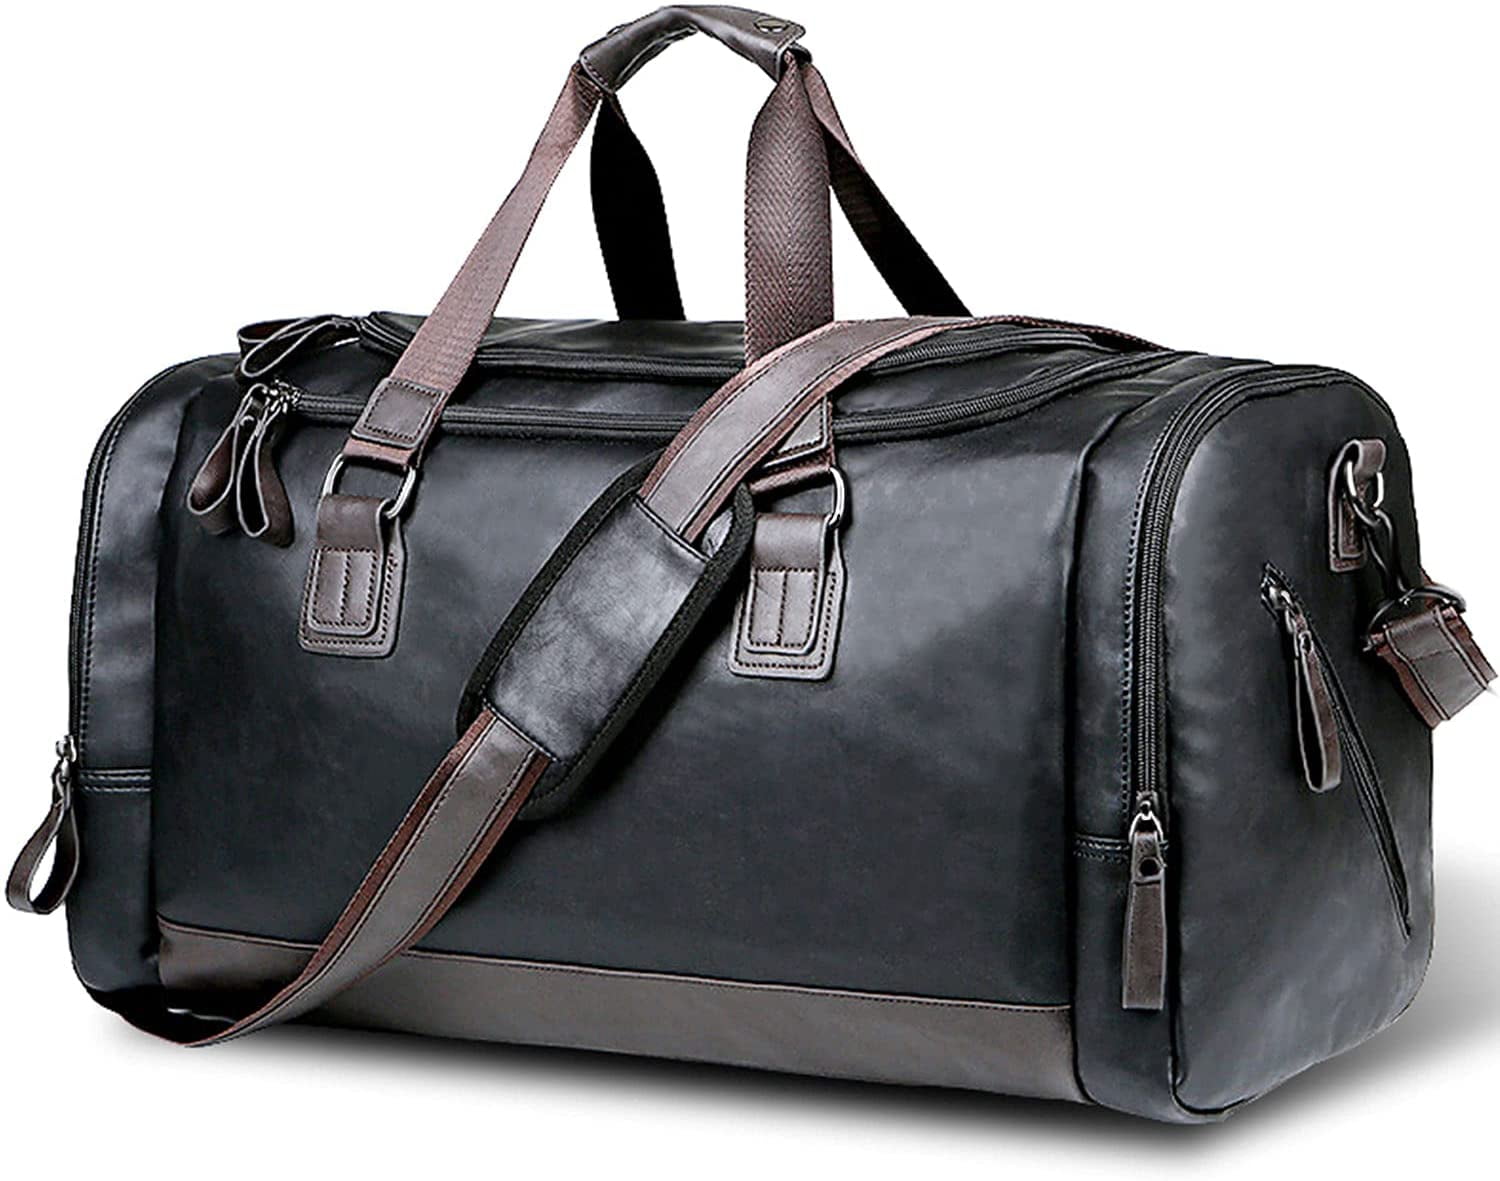 Personalised Faux Leather PU Weekend Bag Travel Holdall Duffle Sport Cabin Gym